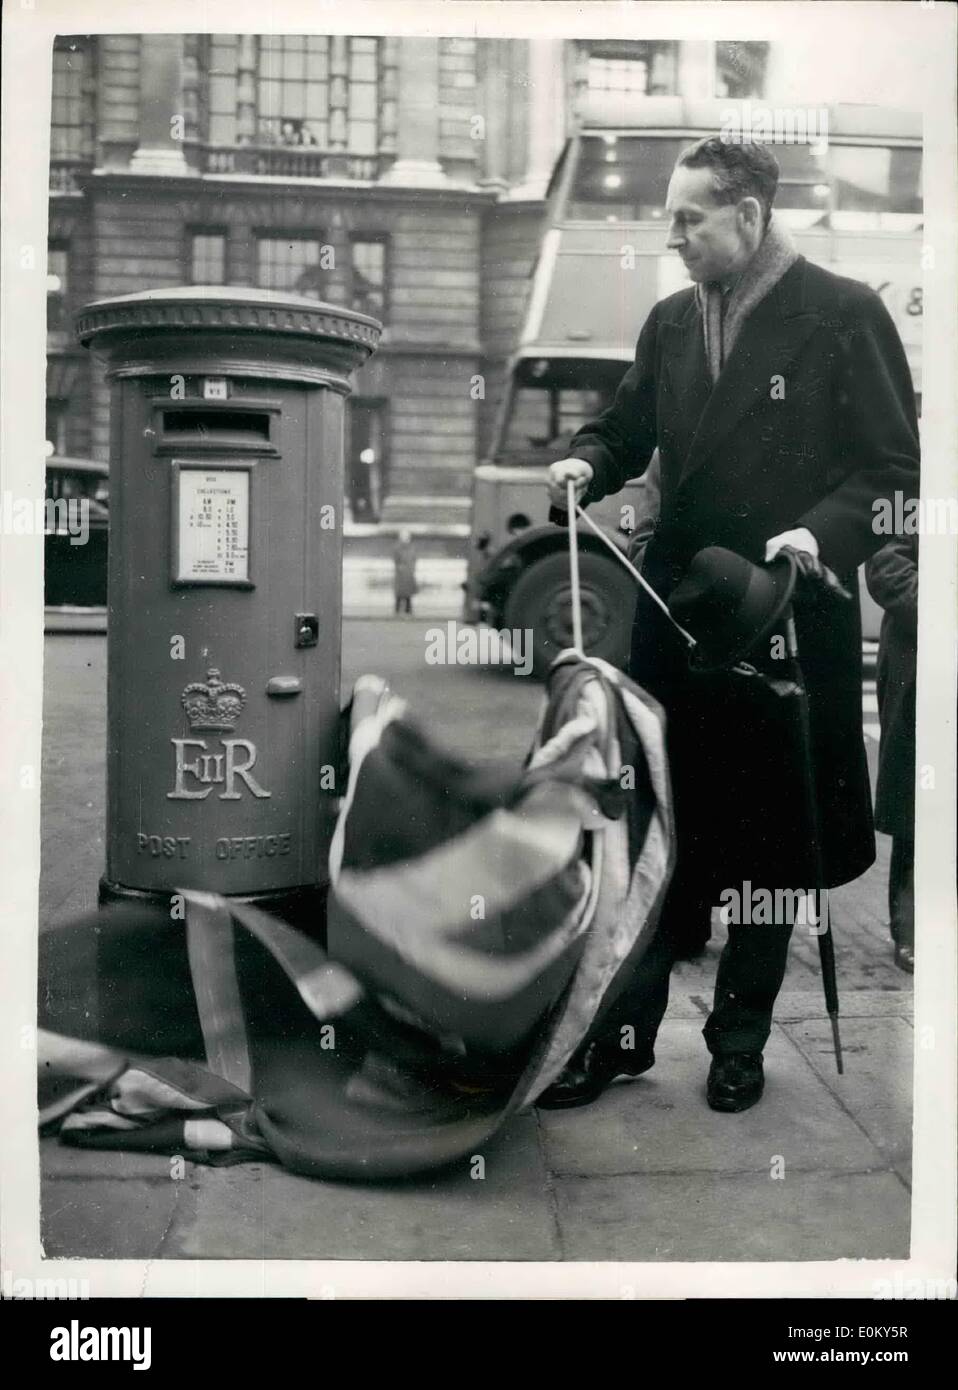 Nov. 11, 1952 - First G.P.O. Pillar Box With ''E.R.'' Cypher Unveiled In London.; The Earl Of Selkirk, O.B.E., Parliamentary Secretary to the Postmaster General - this afternoon unveiled the first G.P.O. pillar box which bears the new Royal Cypher ''E.R.'' on the Whitehell side of the Horse Guards Parade. Photo Shows The Earl Of Selkirk unveiling the new cypher on the pillar box today. Stock Photo